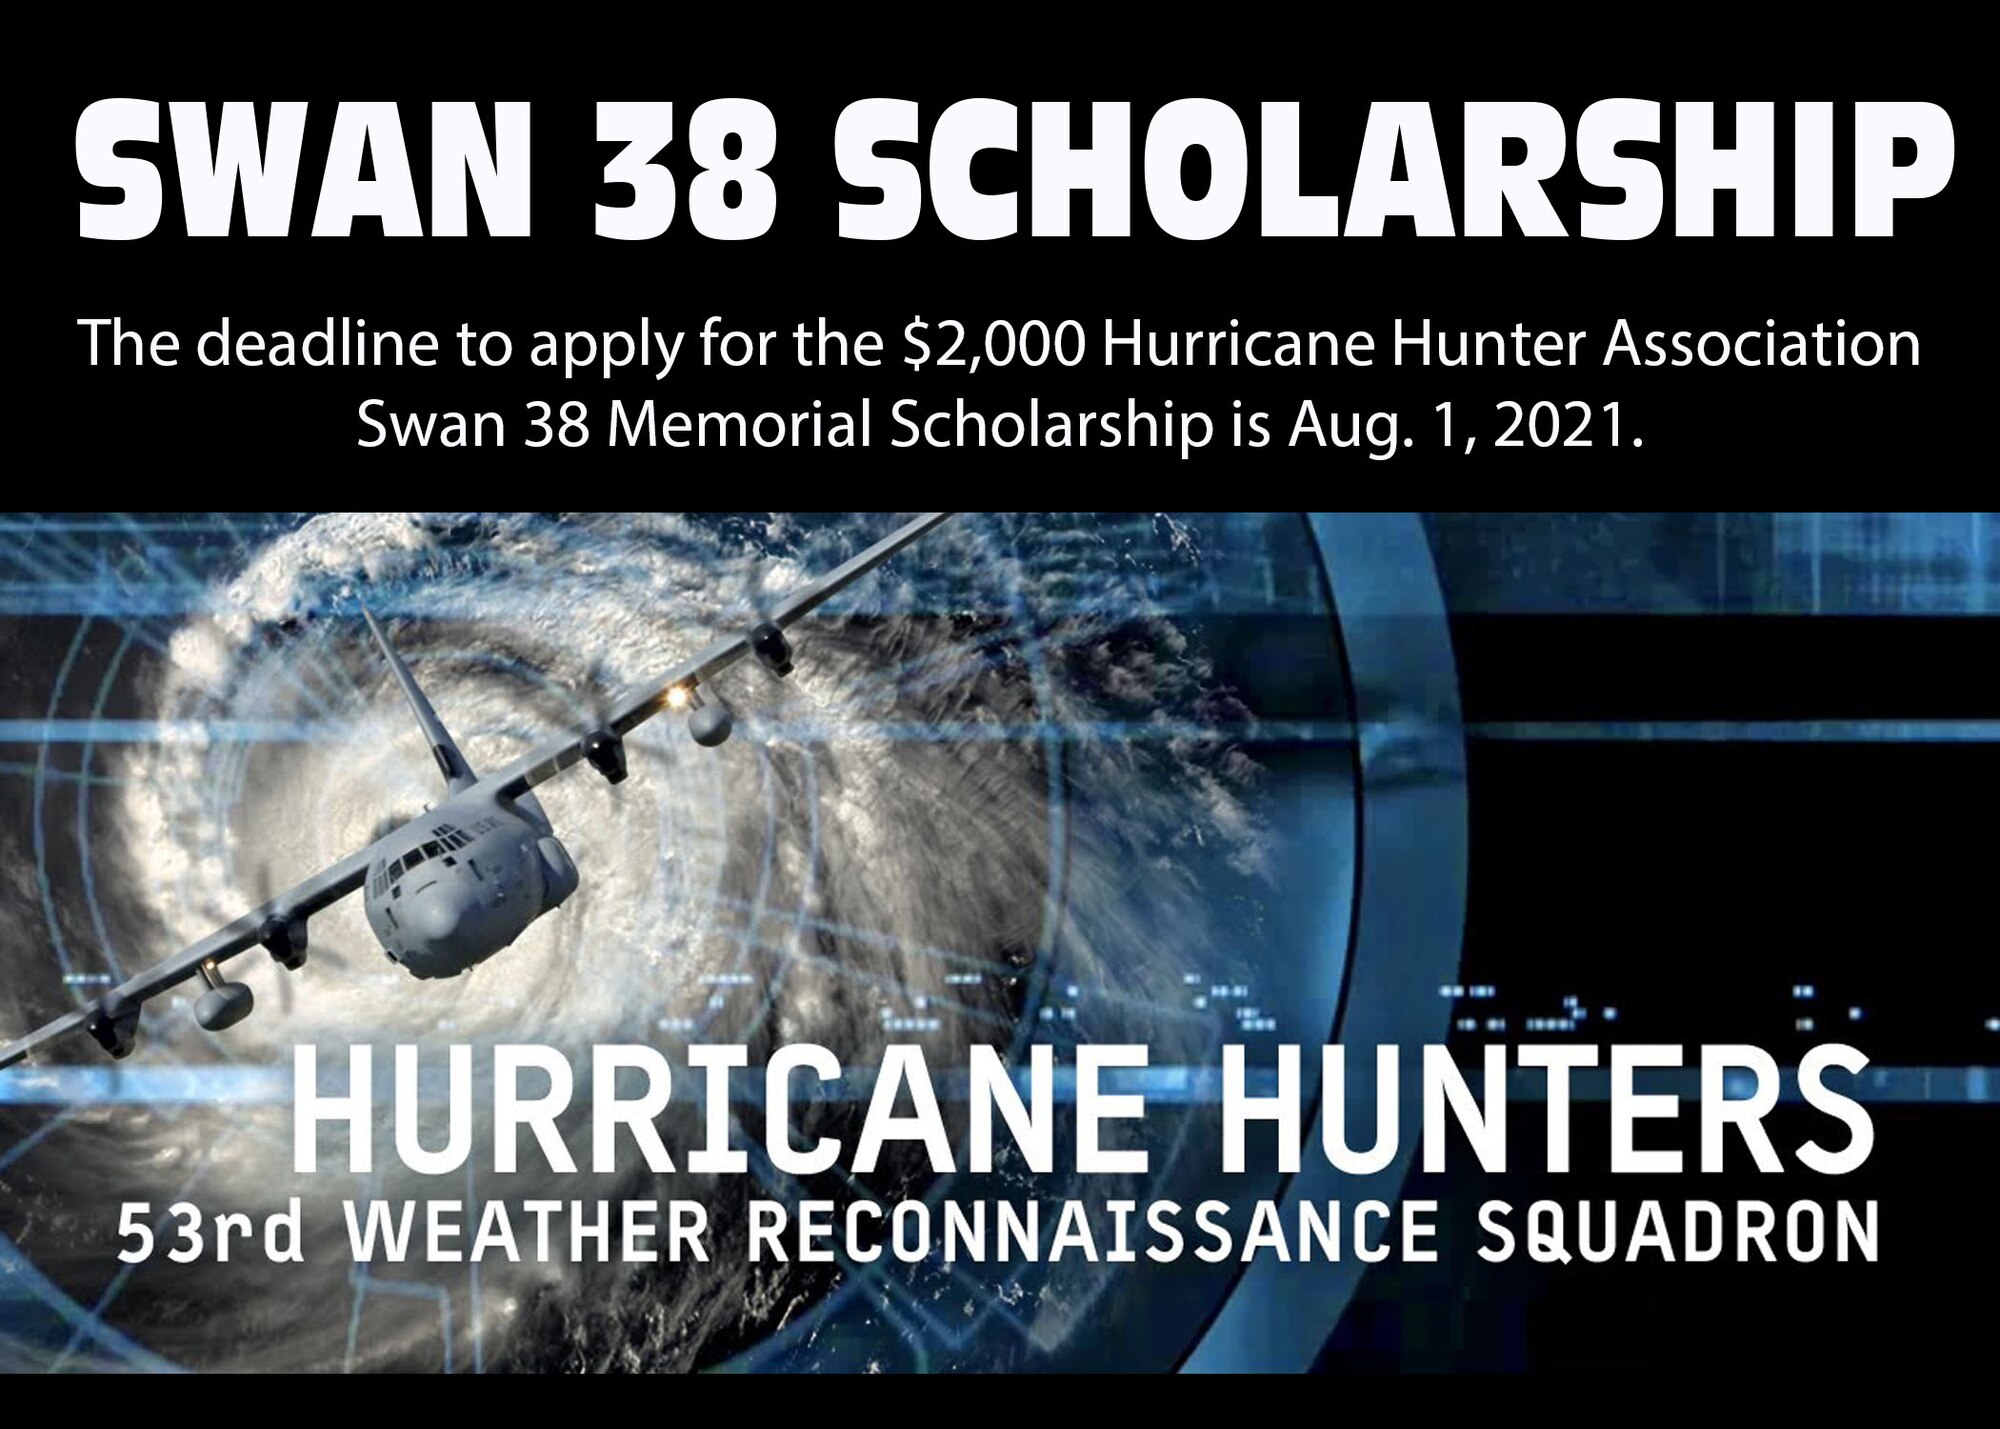 The deadline for the Swan 38 Memorial Scholarship presented by the Hurricane Hunter Association is Aug. 1, 2021. (U.S. Air Force graphic by Lt. Col. Marnee A. C. Losurdo)